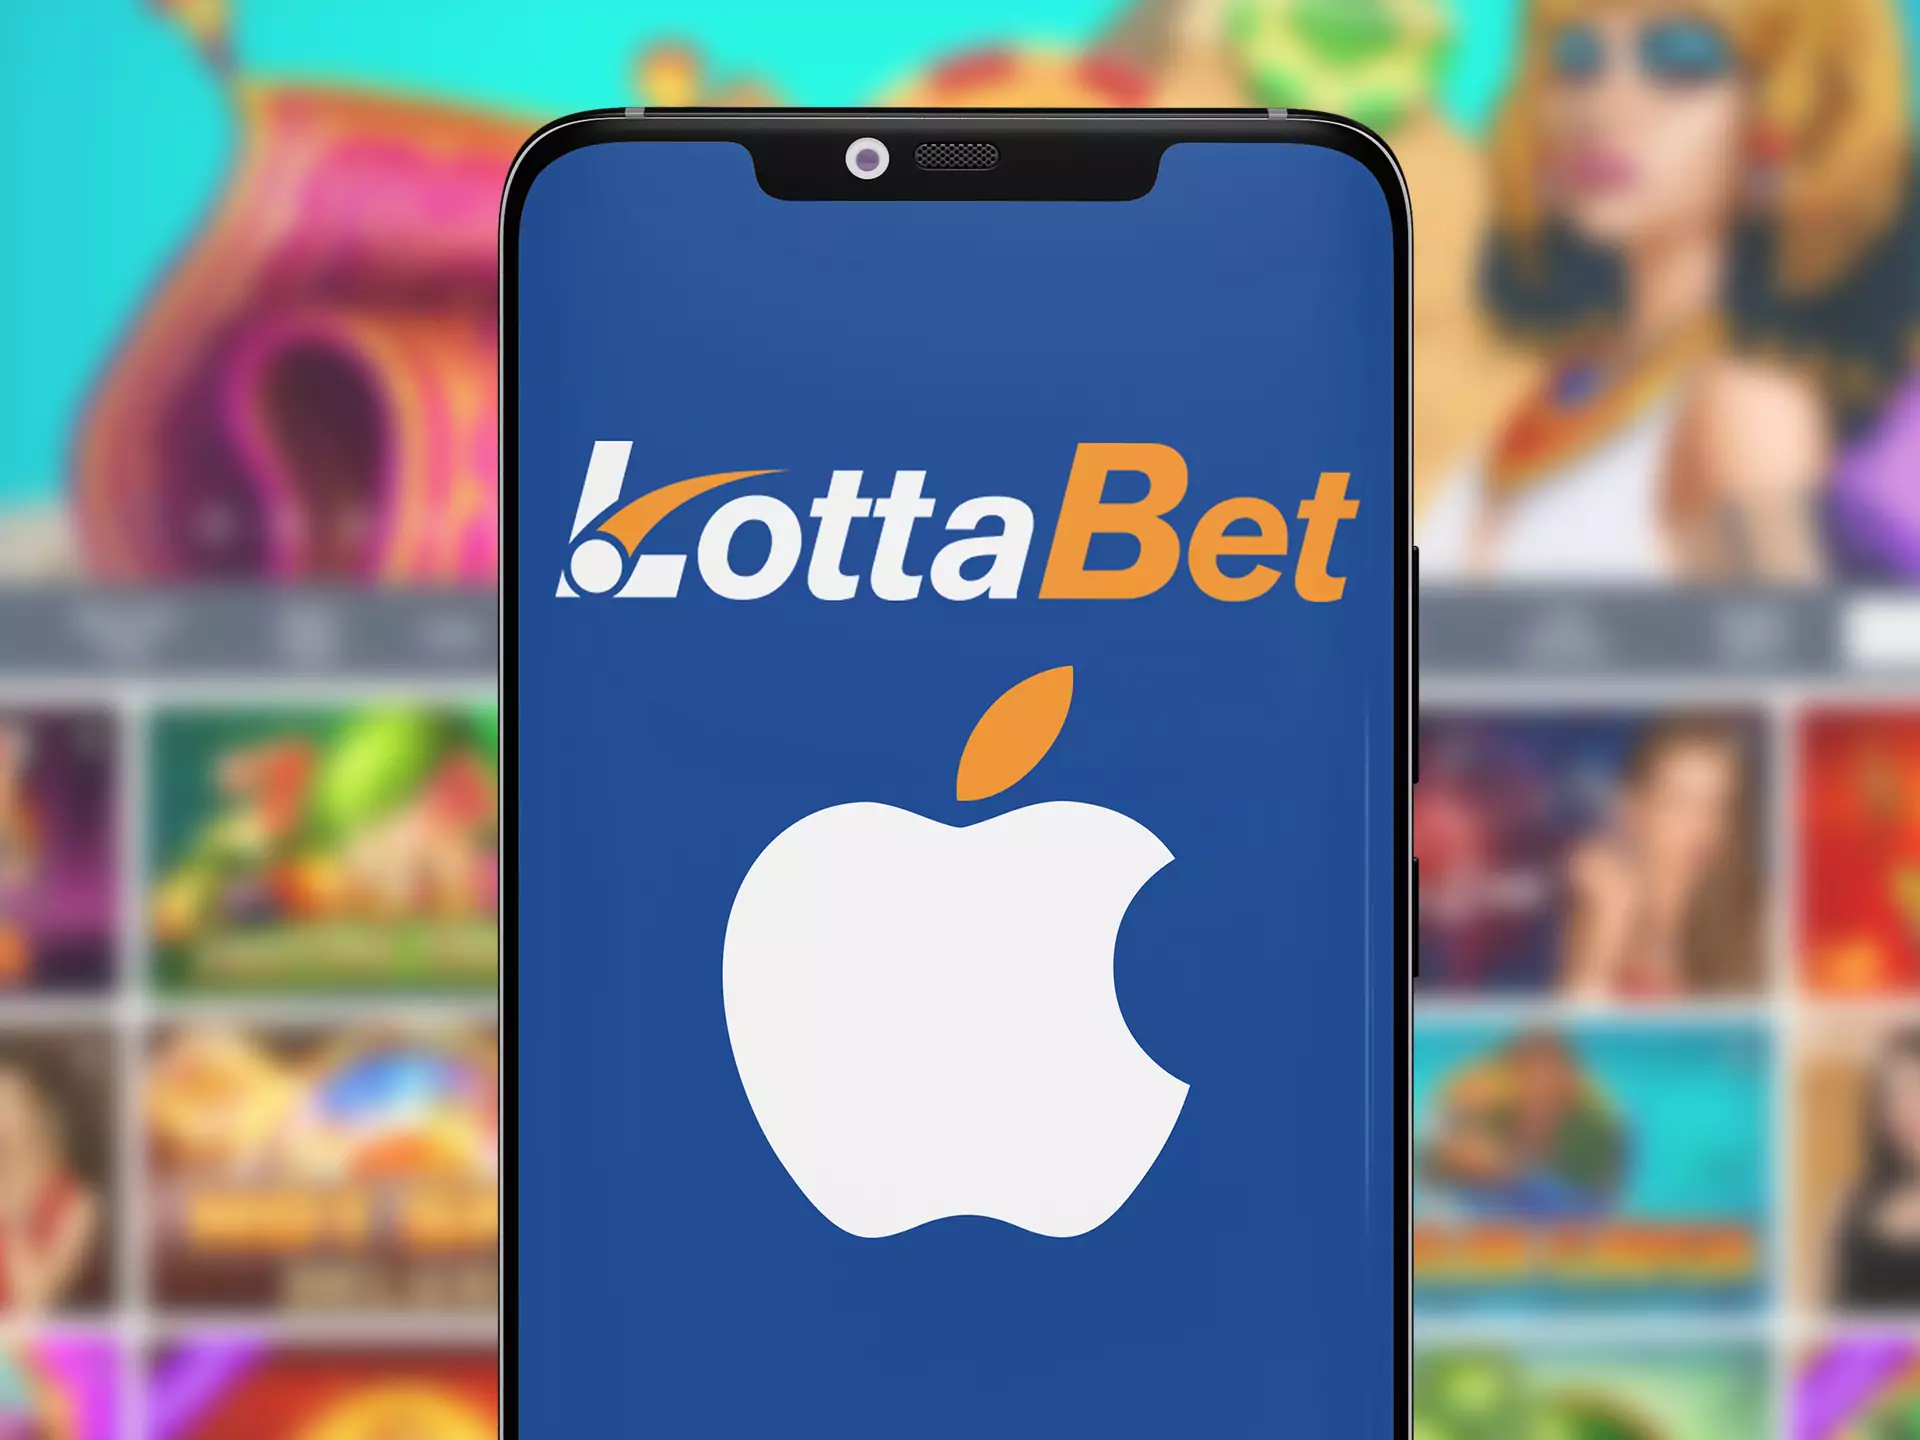 The LottaBet app provides the better betting experience on iOS devices.